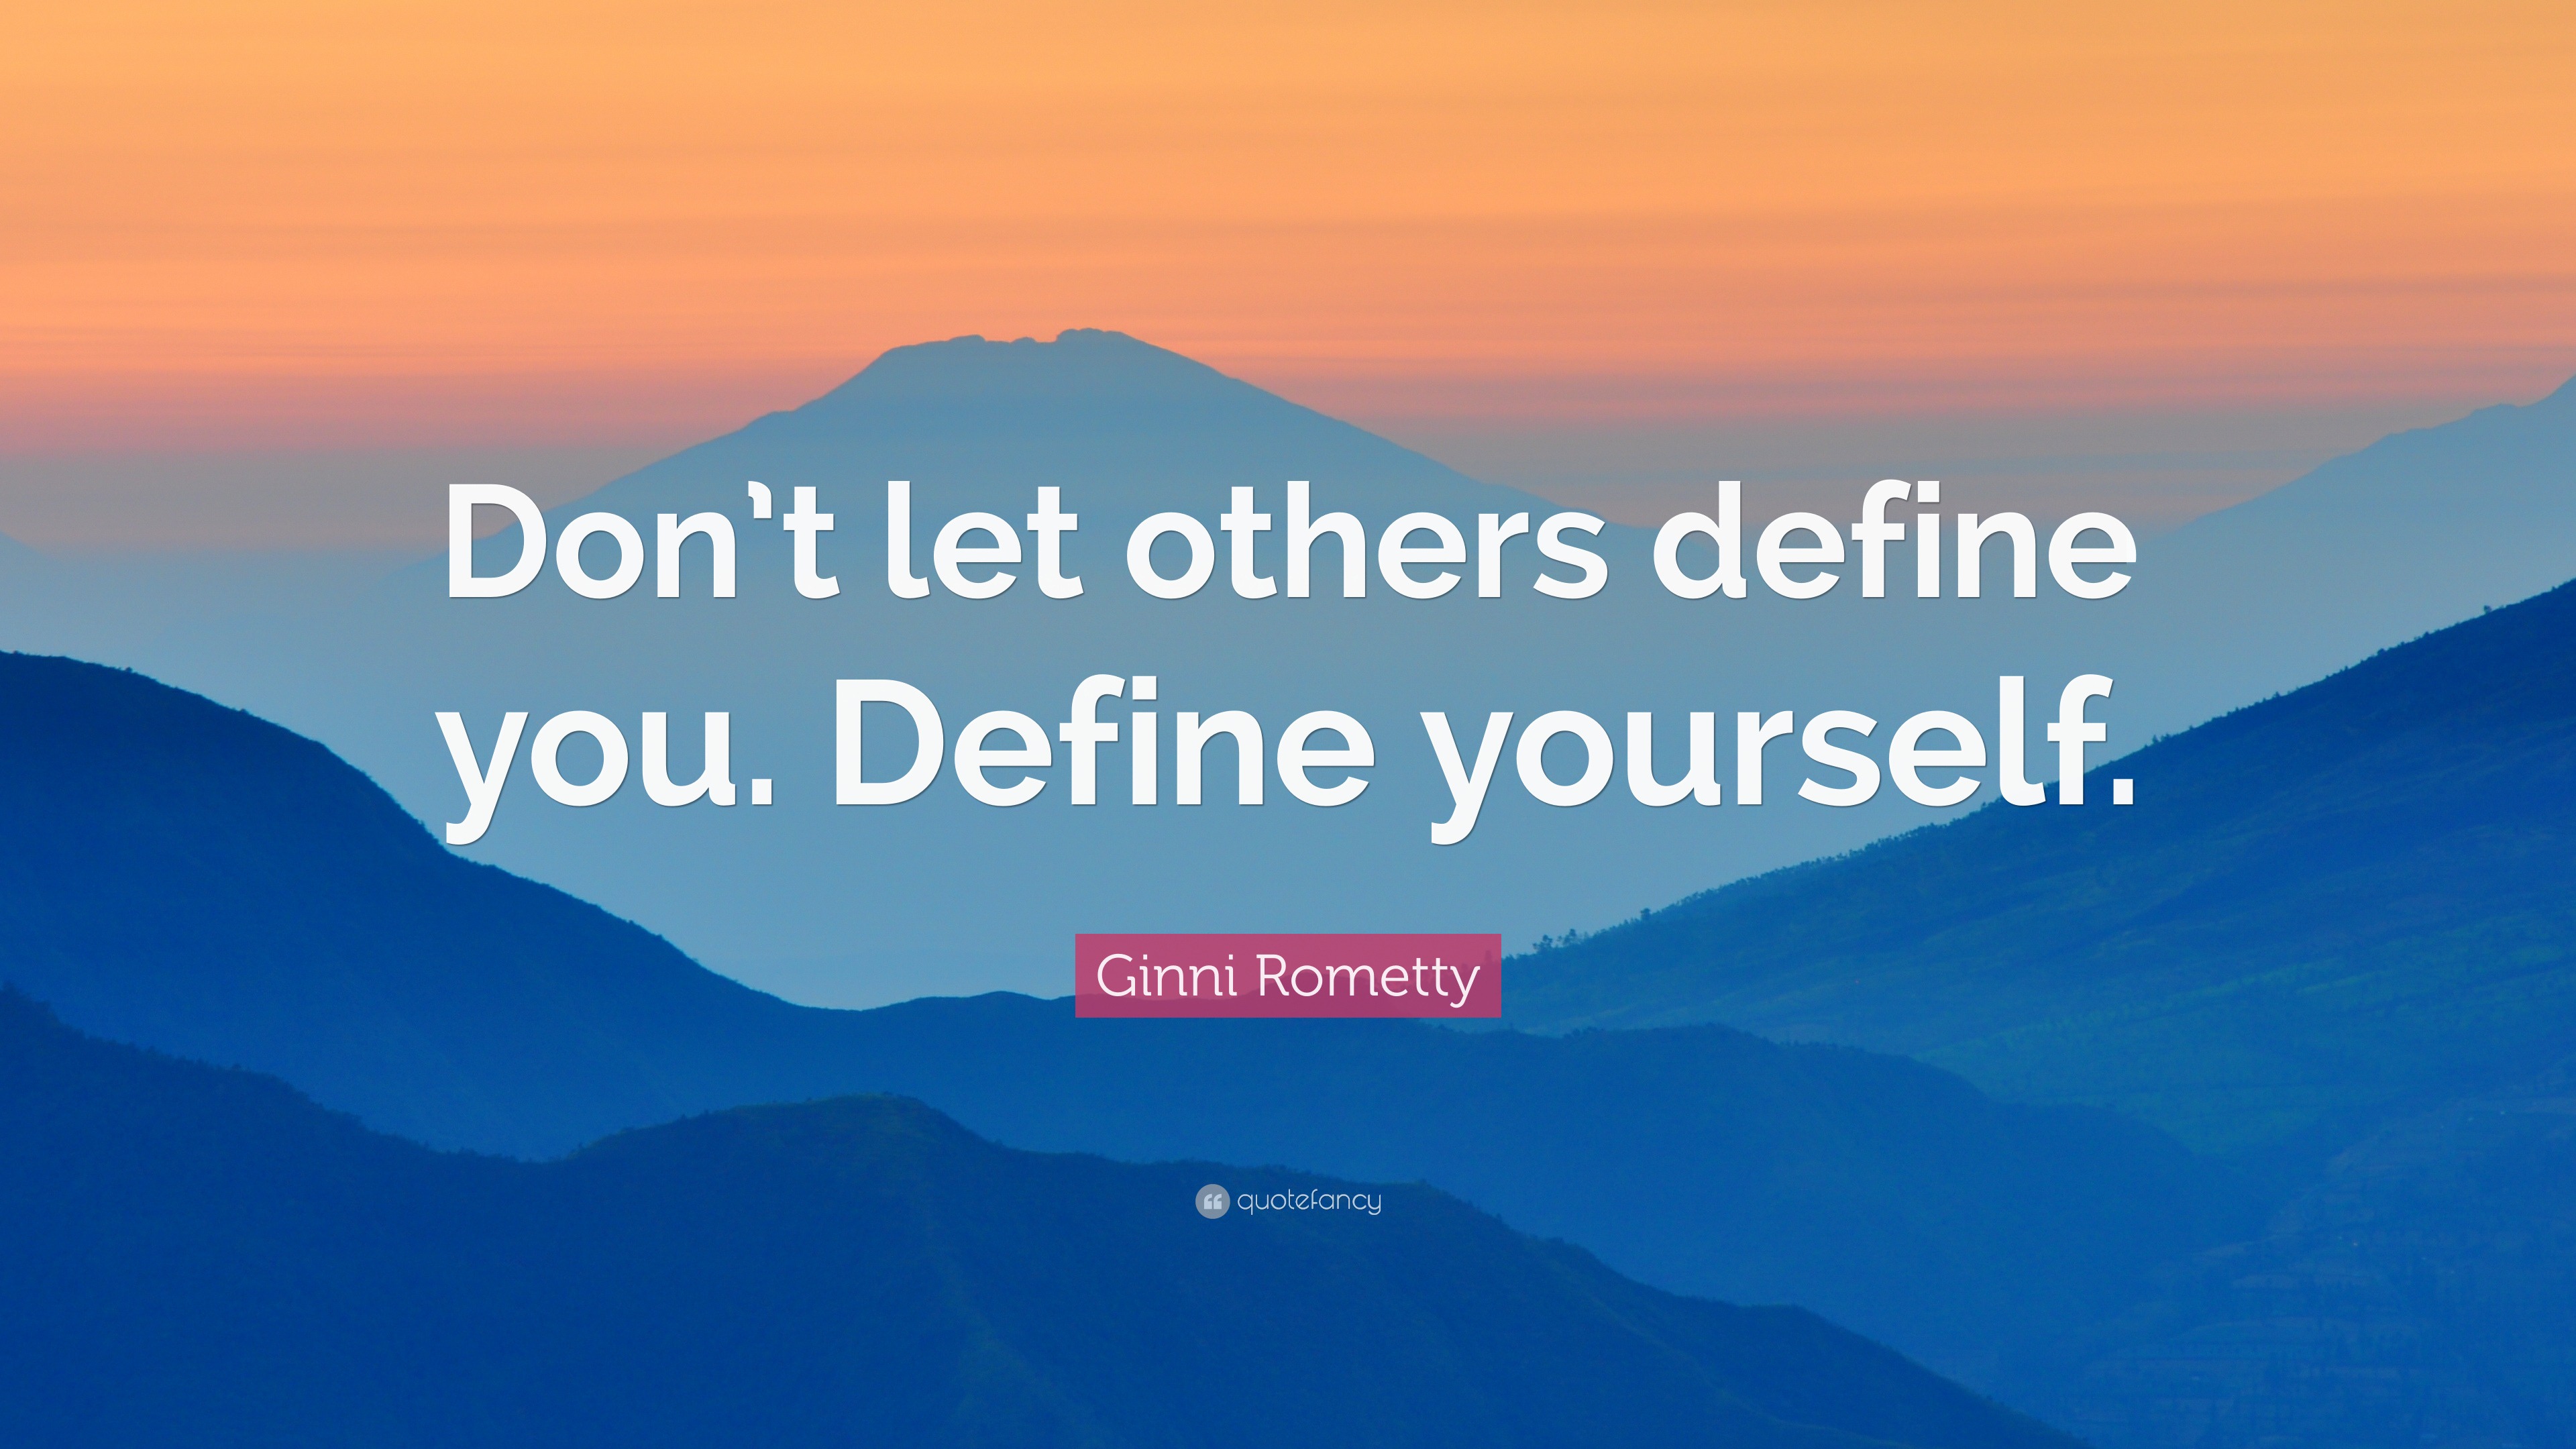 Ginni Rometty Quote: “Don’t let others define you. Define yourself